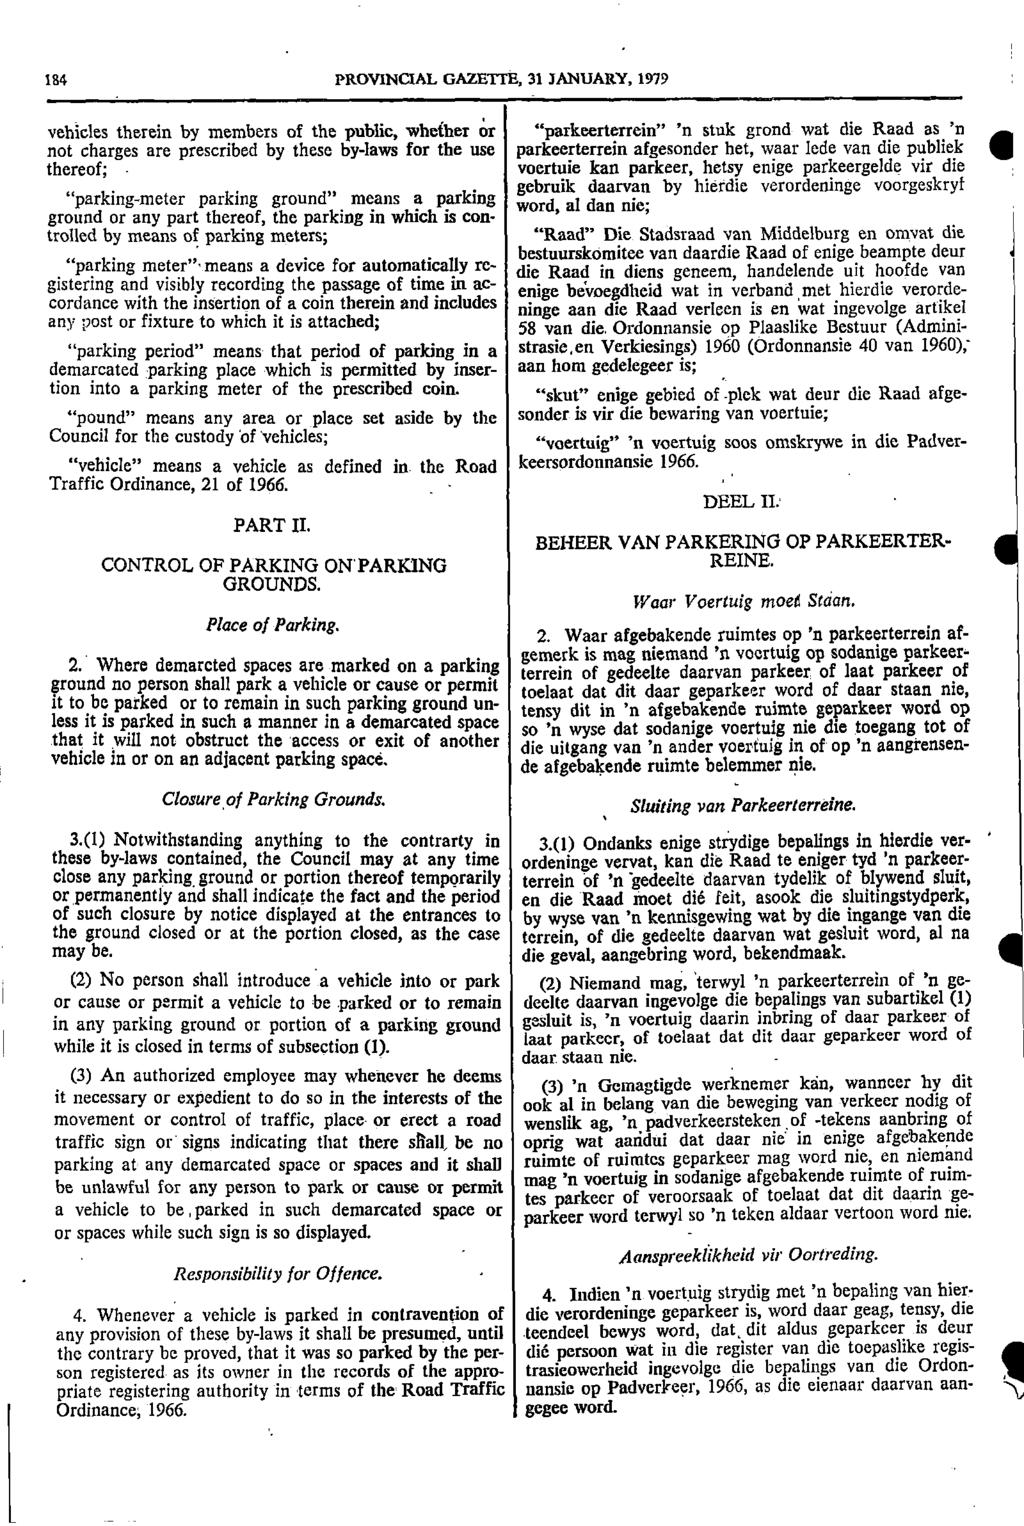 84 PROVNCAL GAZETTE 3 JANUARY 979 vehicles therein by members of the public whether or "parkeerterrein" n stuk grond wat die Raad as n not charges are prescribed by these bylaws for the use